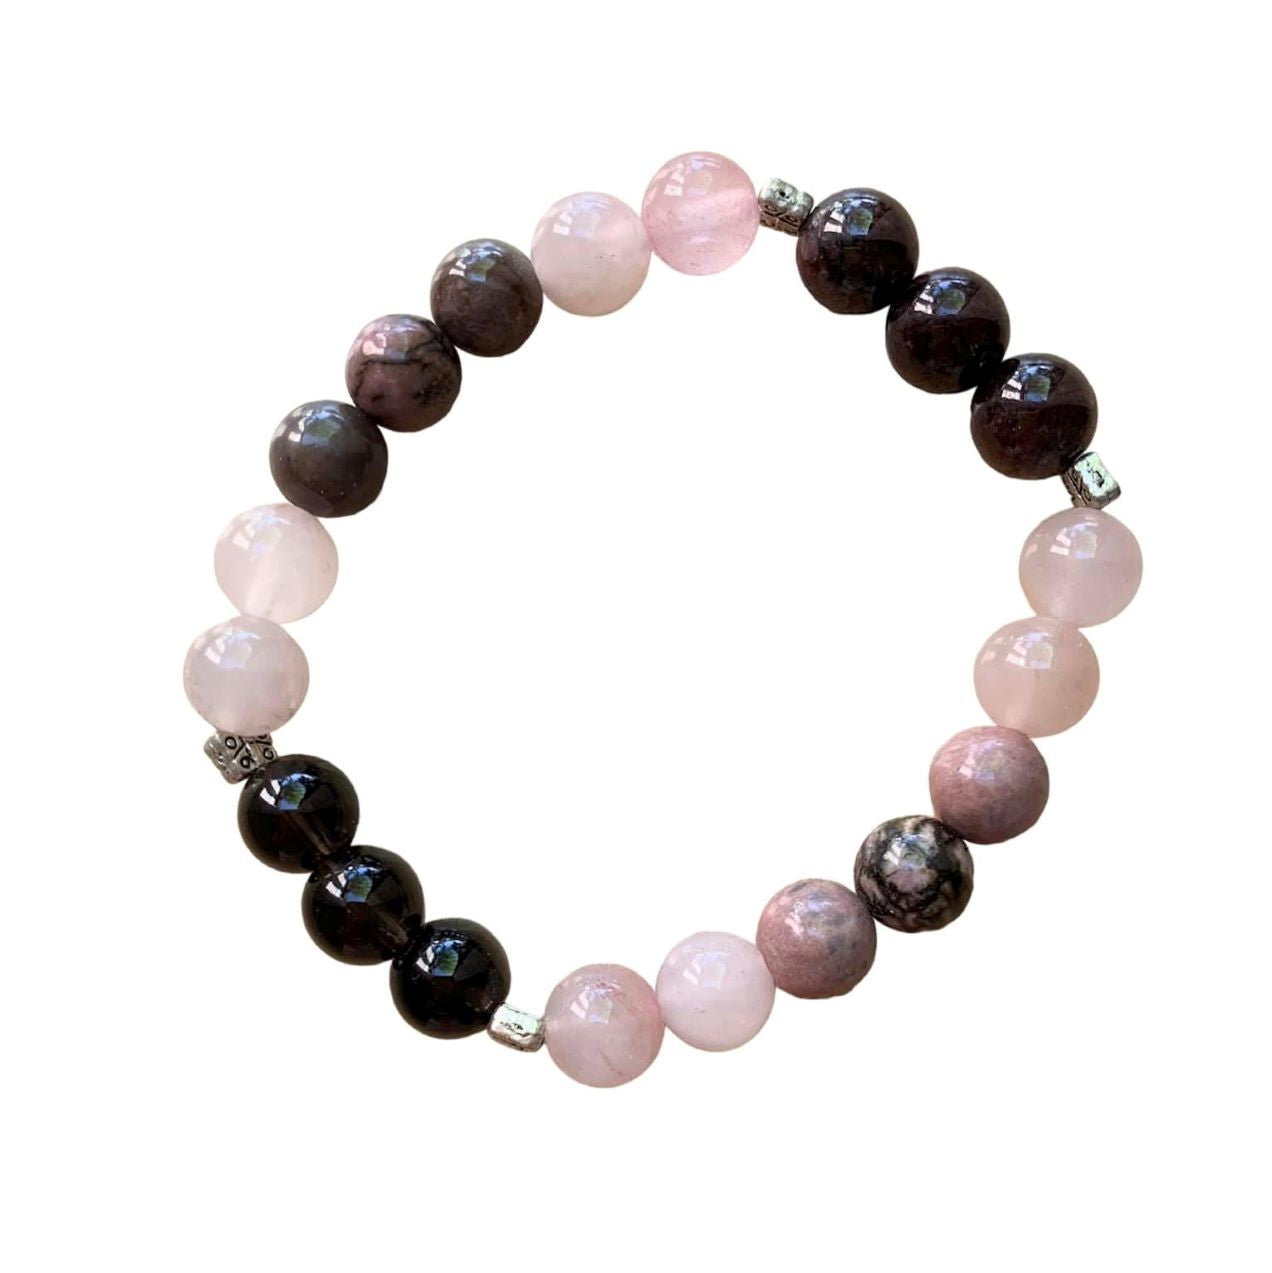 Healing Crystal Bracelets for Love Romantic Ignition